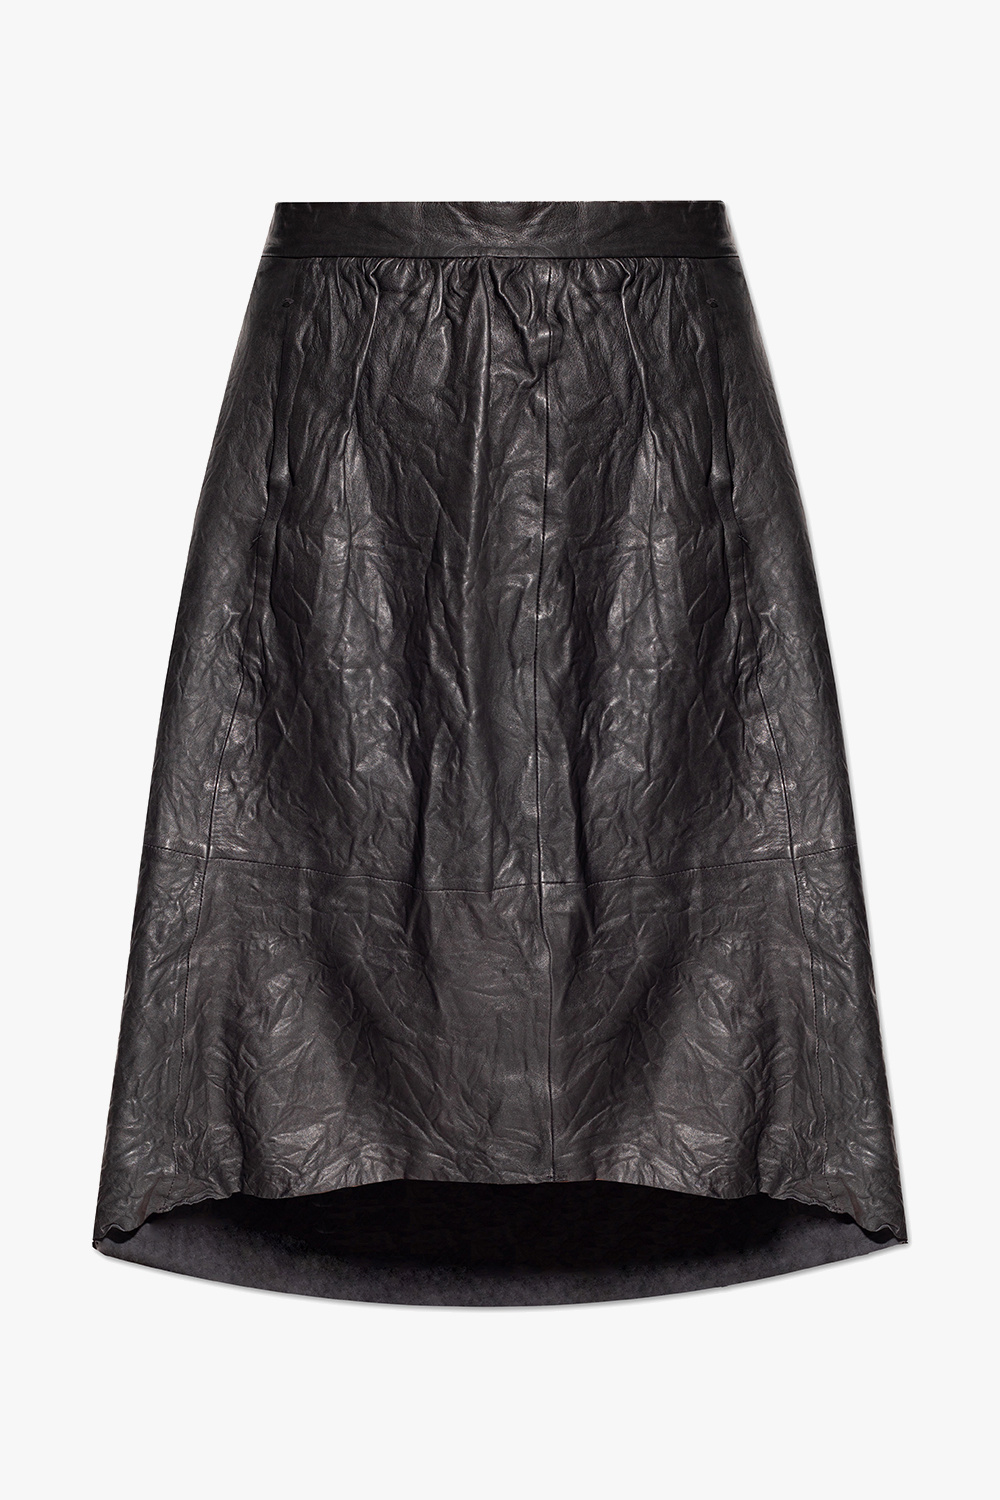 Zadig & Voltaire ‘Josilyn’ leather skirt